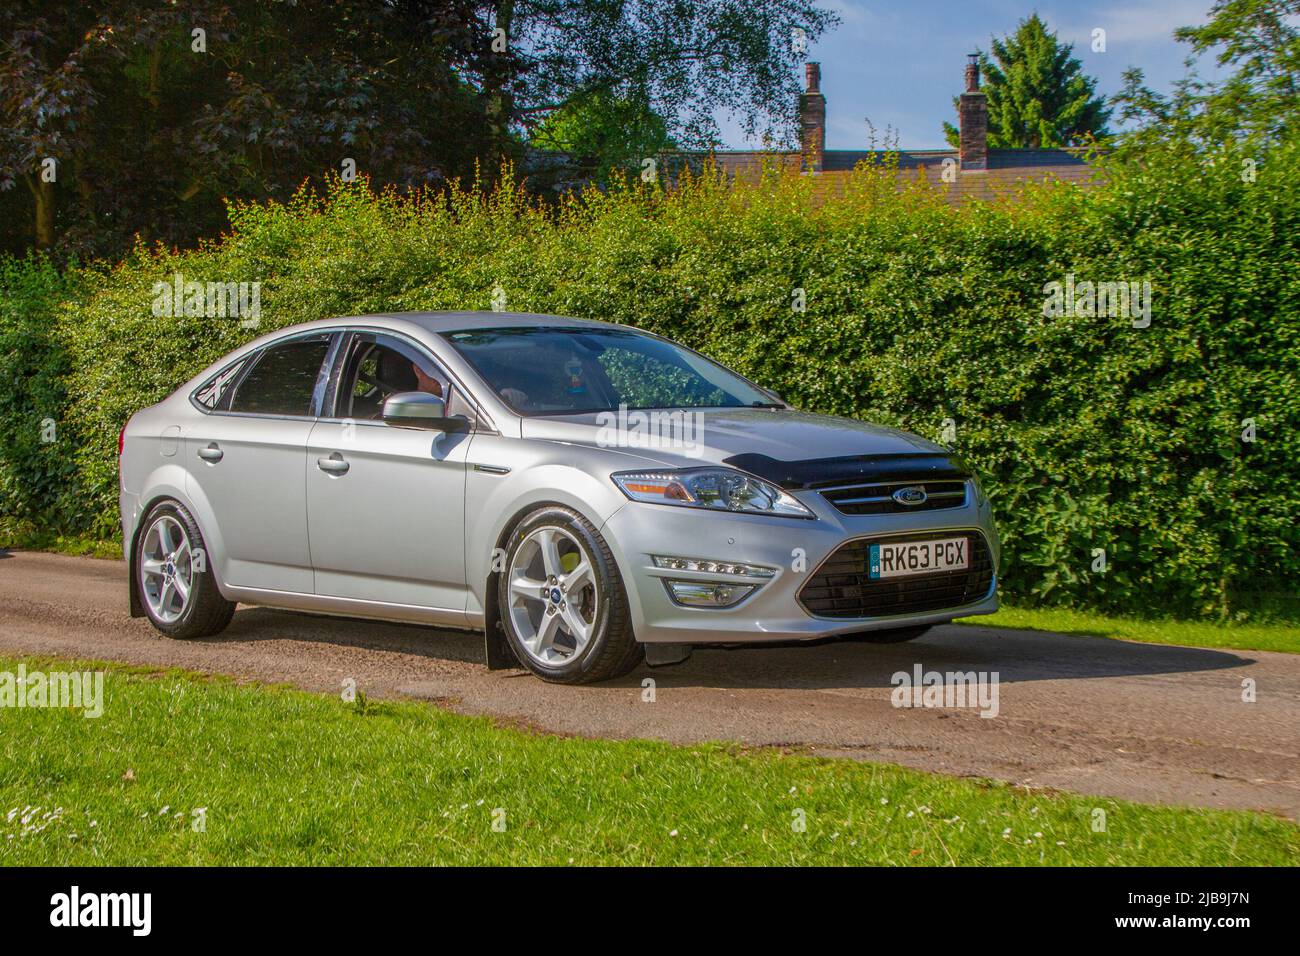 2013 Silver Ford Mondeo 1997cc Diesel 6 Speed H arriving in Worden Park Motor Village for the Leyland Festival, UK Stock Photo